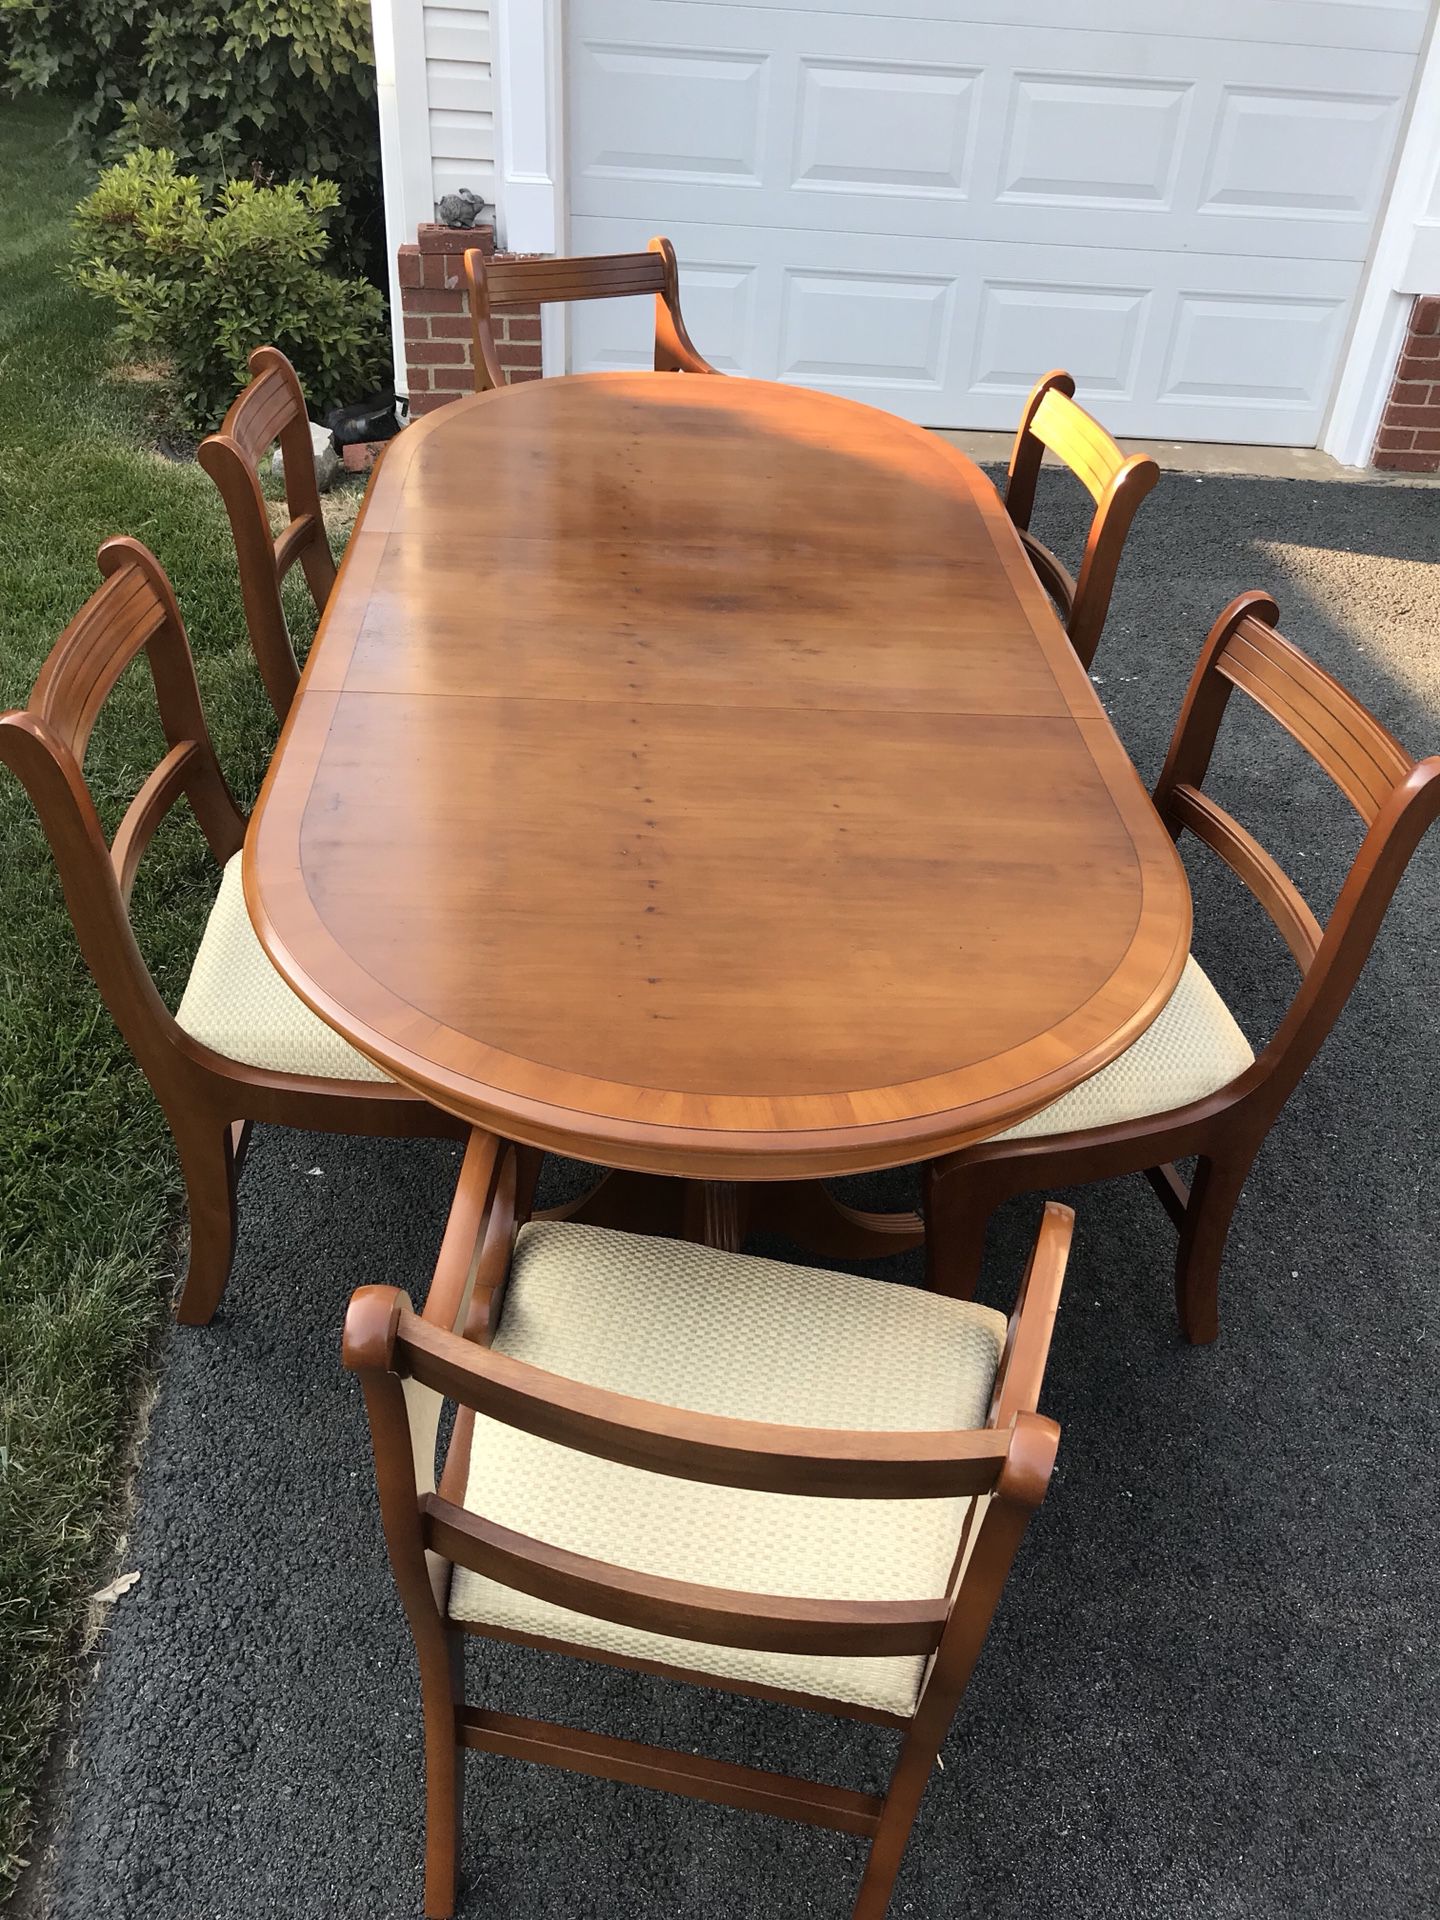 Dining set with 6 chairs